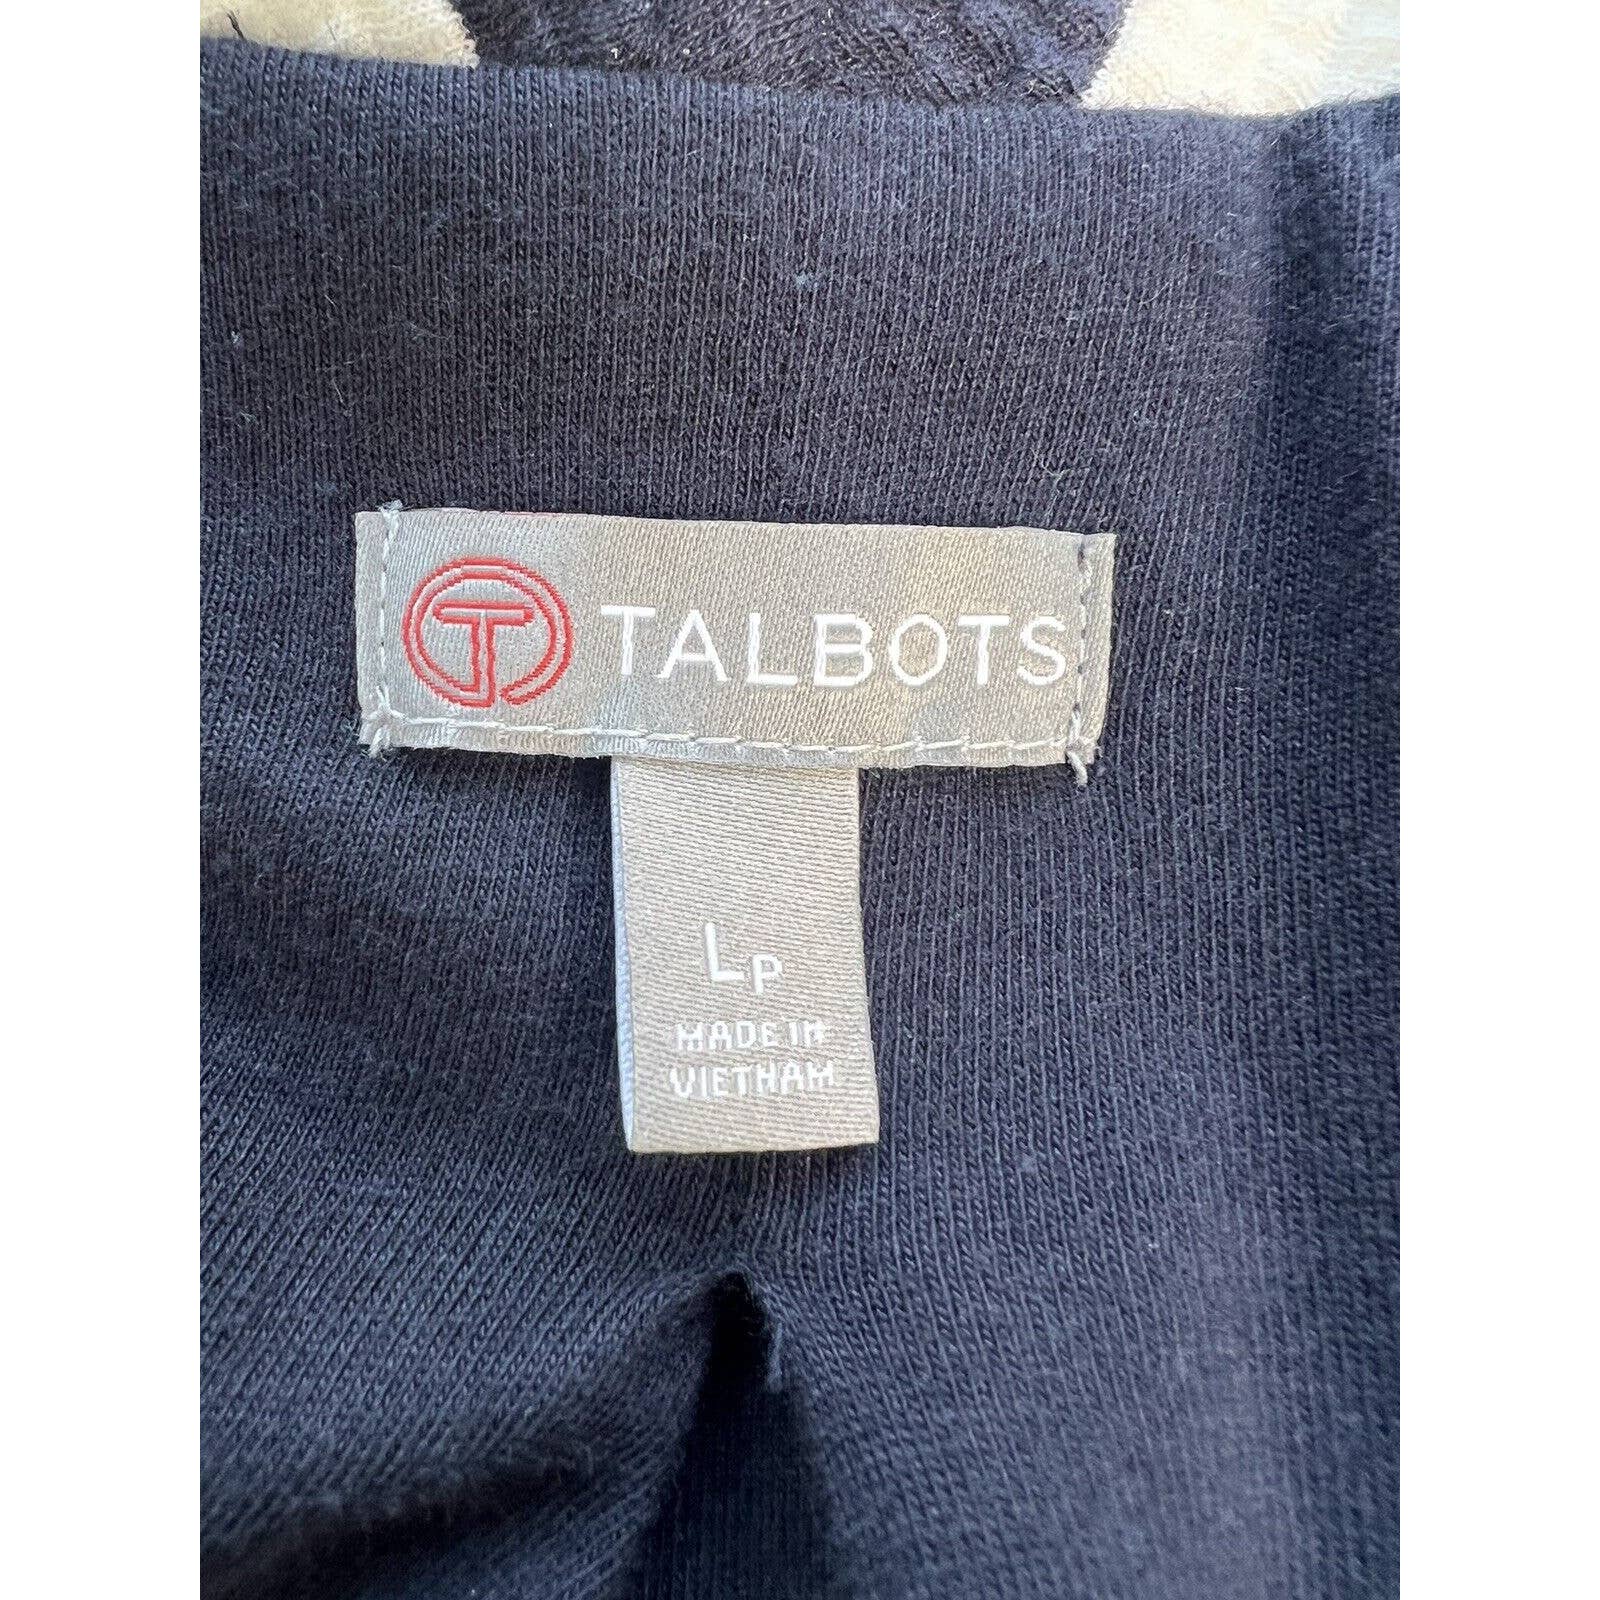 T by Talbots Jacket Womens Large Navy Blue White Stripe Casual Nautical Zip